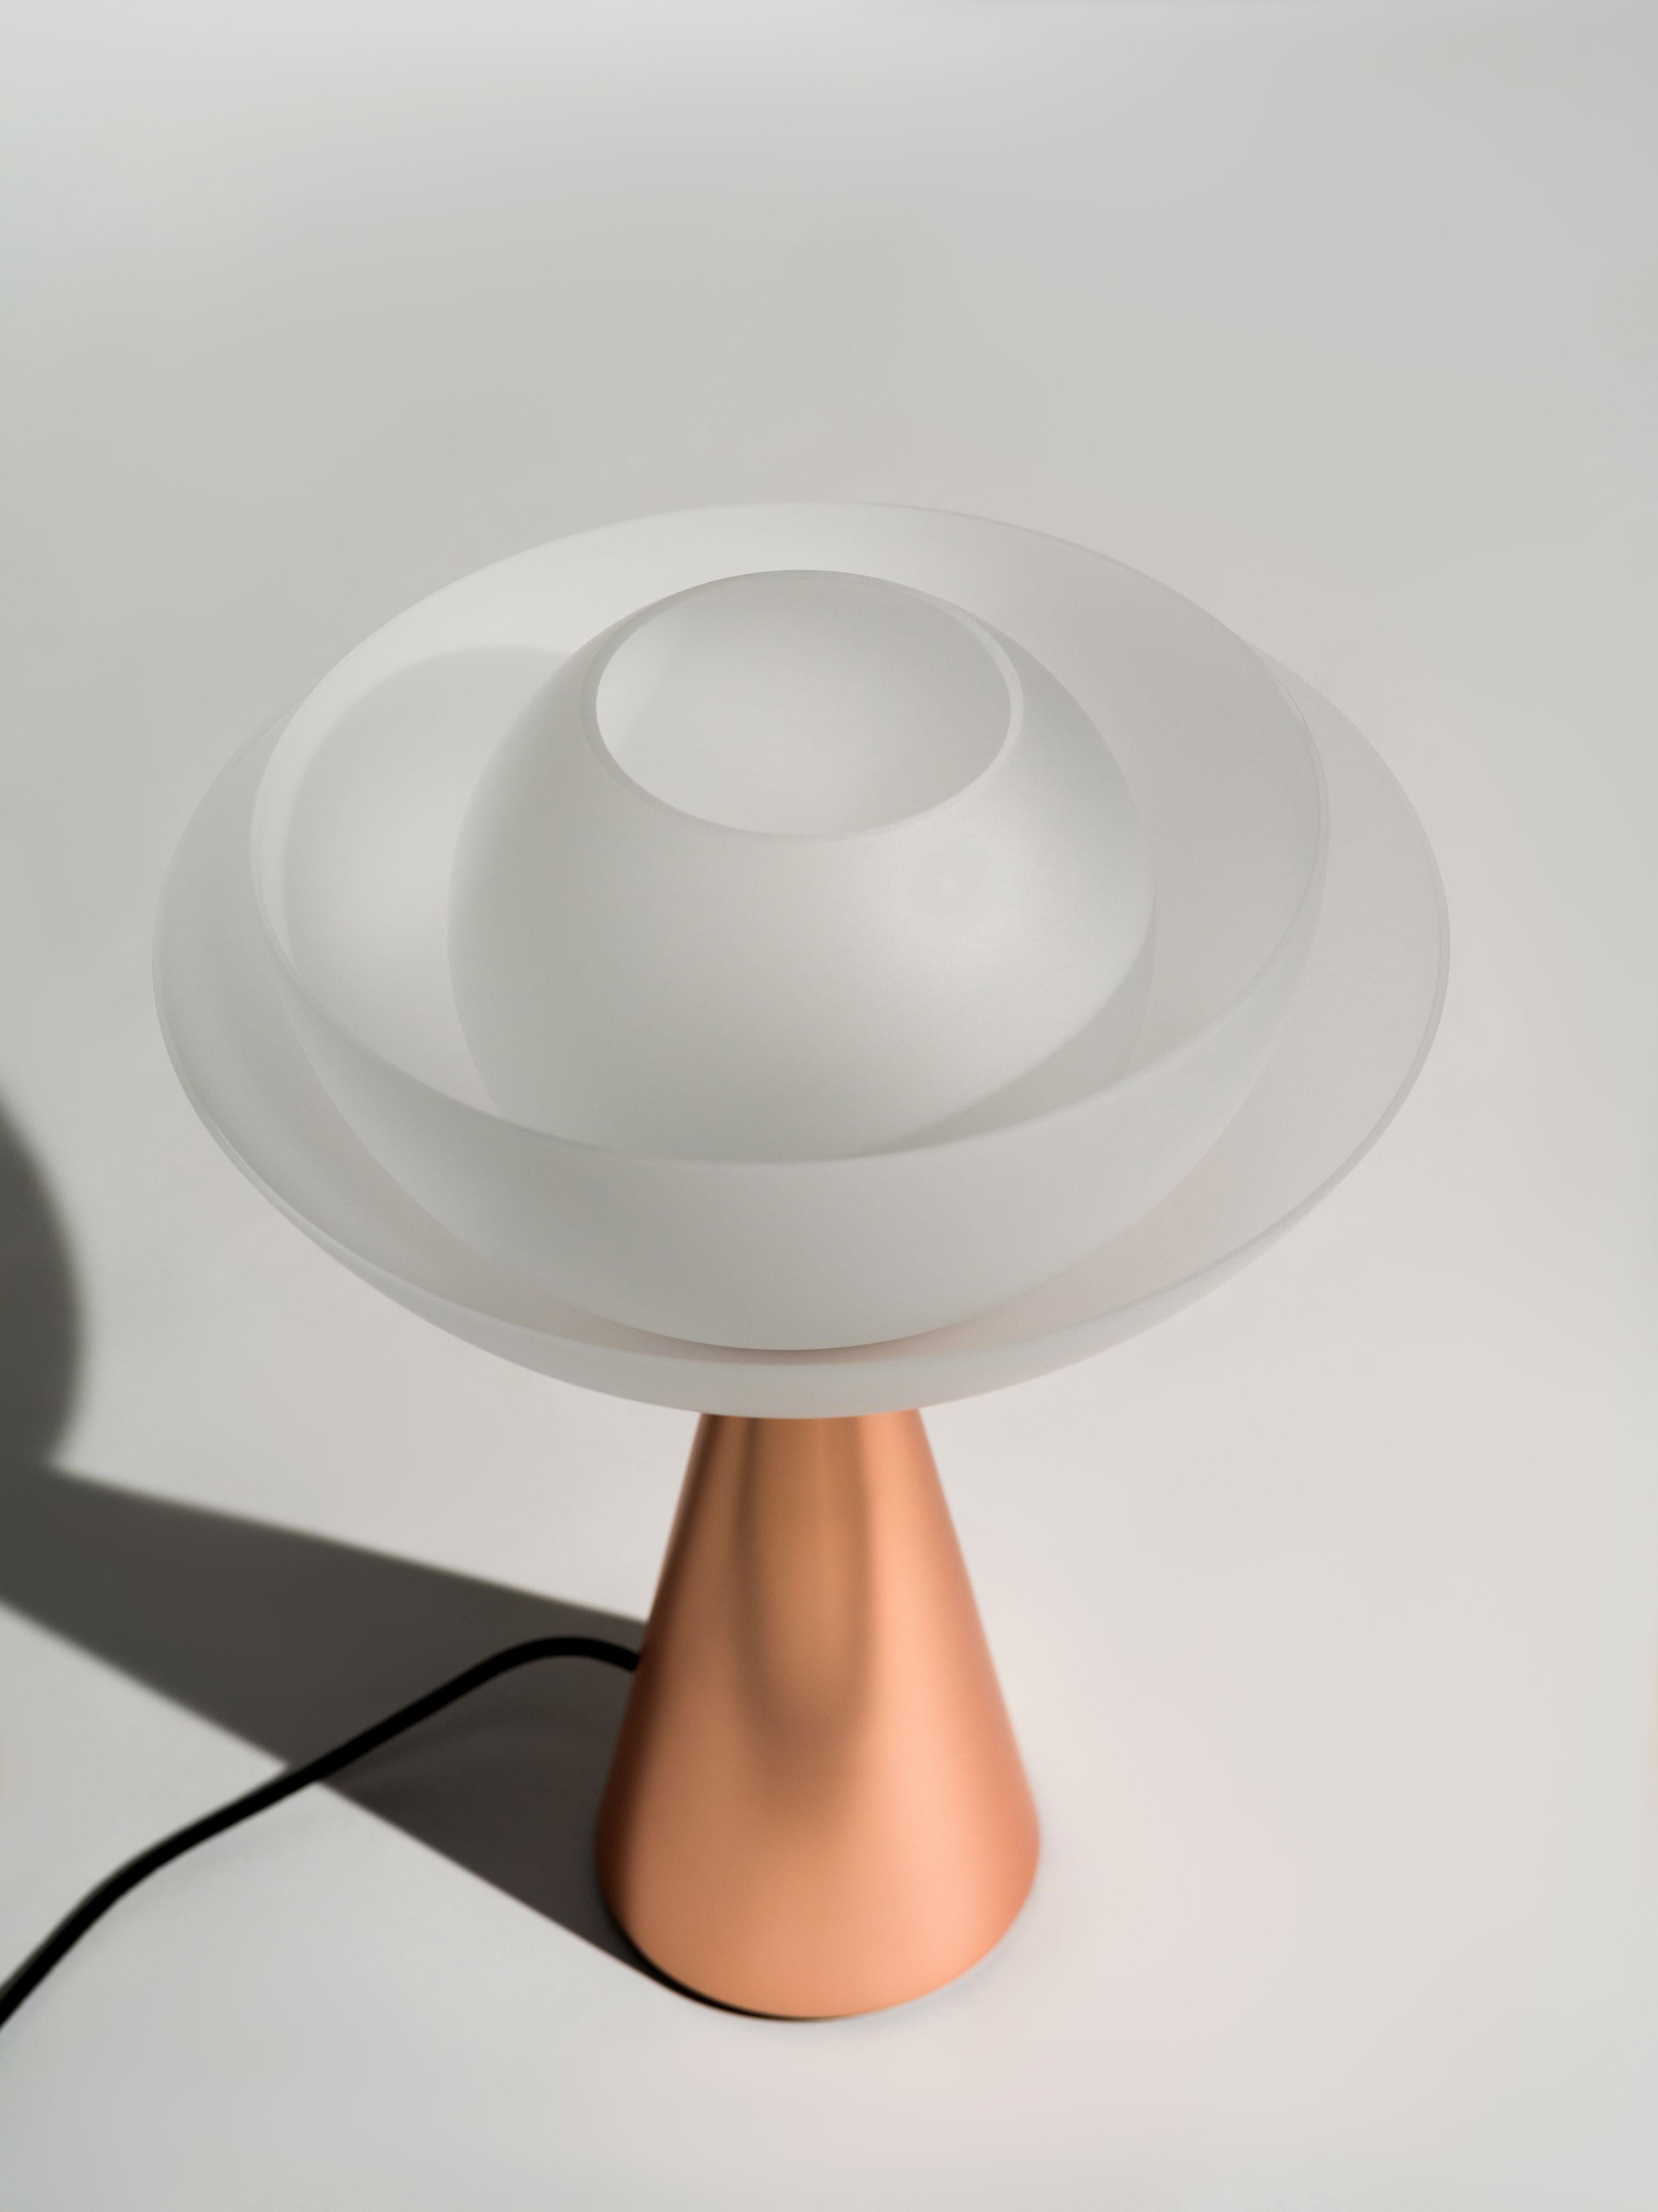 Contemporary Lotus Table Lamp by Mason Editions For Sale